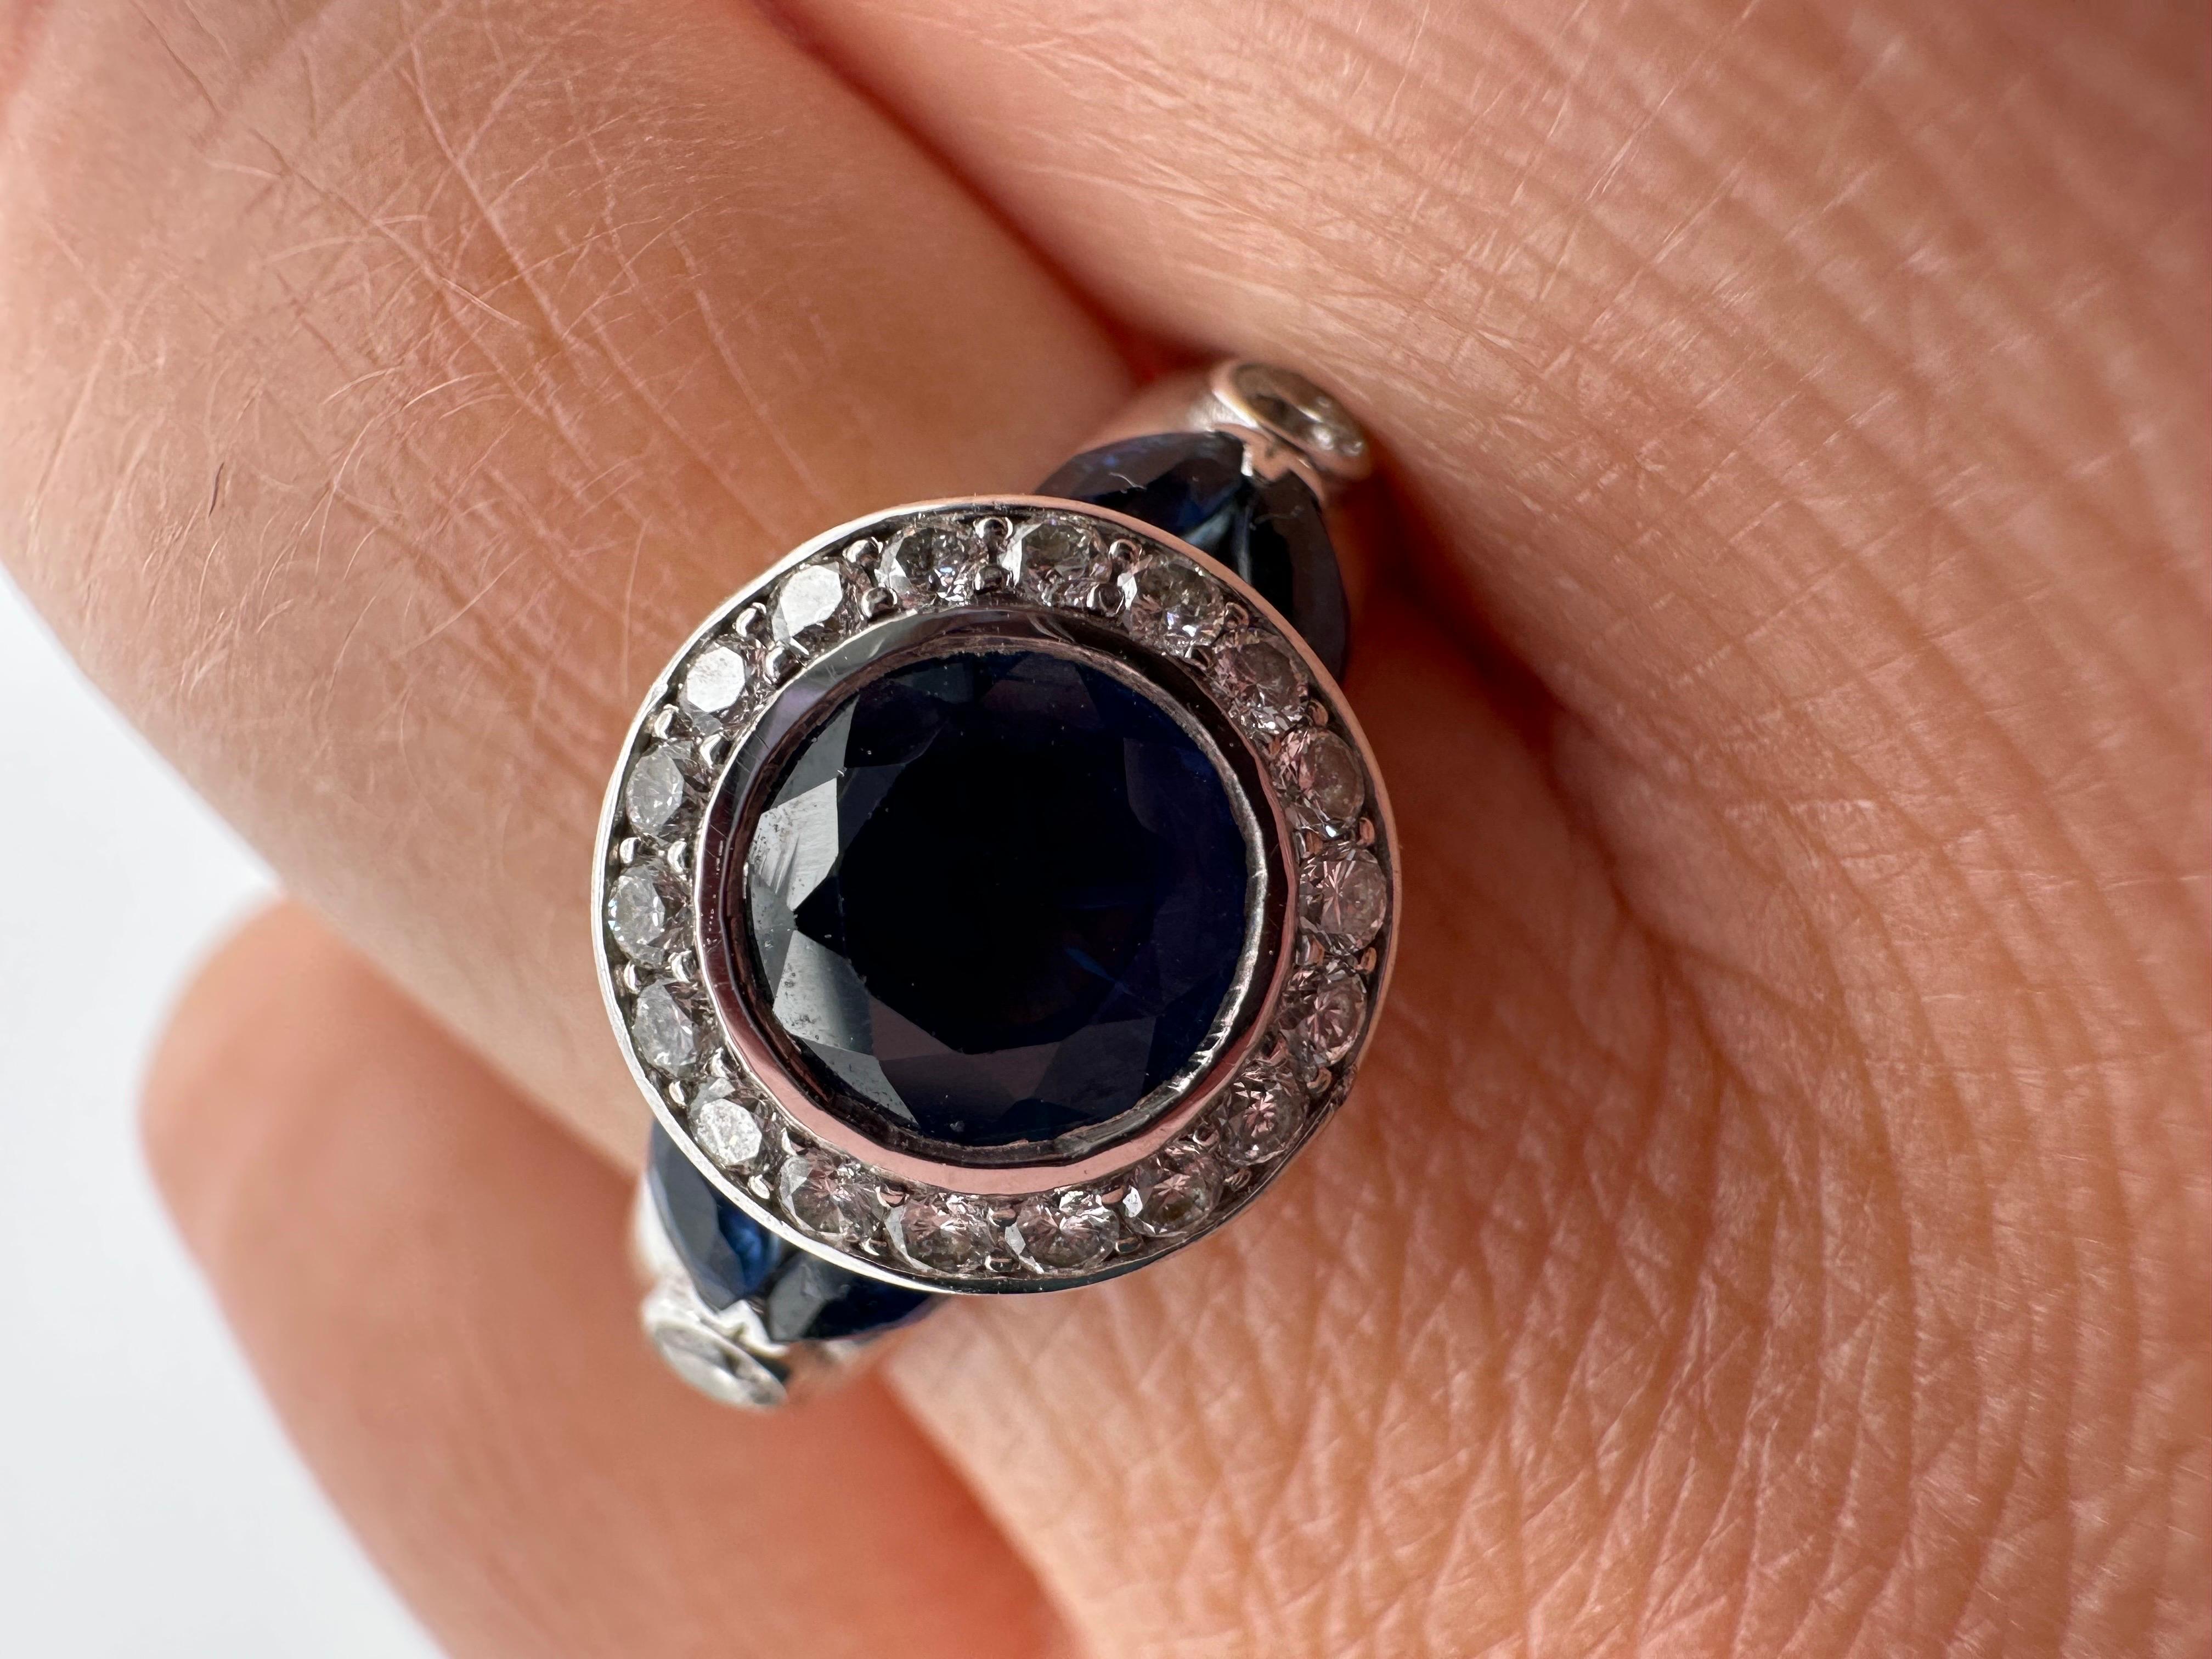 Intresting Blue Sapphire & Diamond ring in 18KT white gold, made so well a chunky engagement ring with comfort fit and hand engraved elements.

Metal Type: 18KT

Natural Sapphire(s):
Color: Dark Blue
Cut:Round, Marquise
Carat: 1.45ct
Clarity: